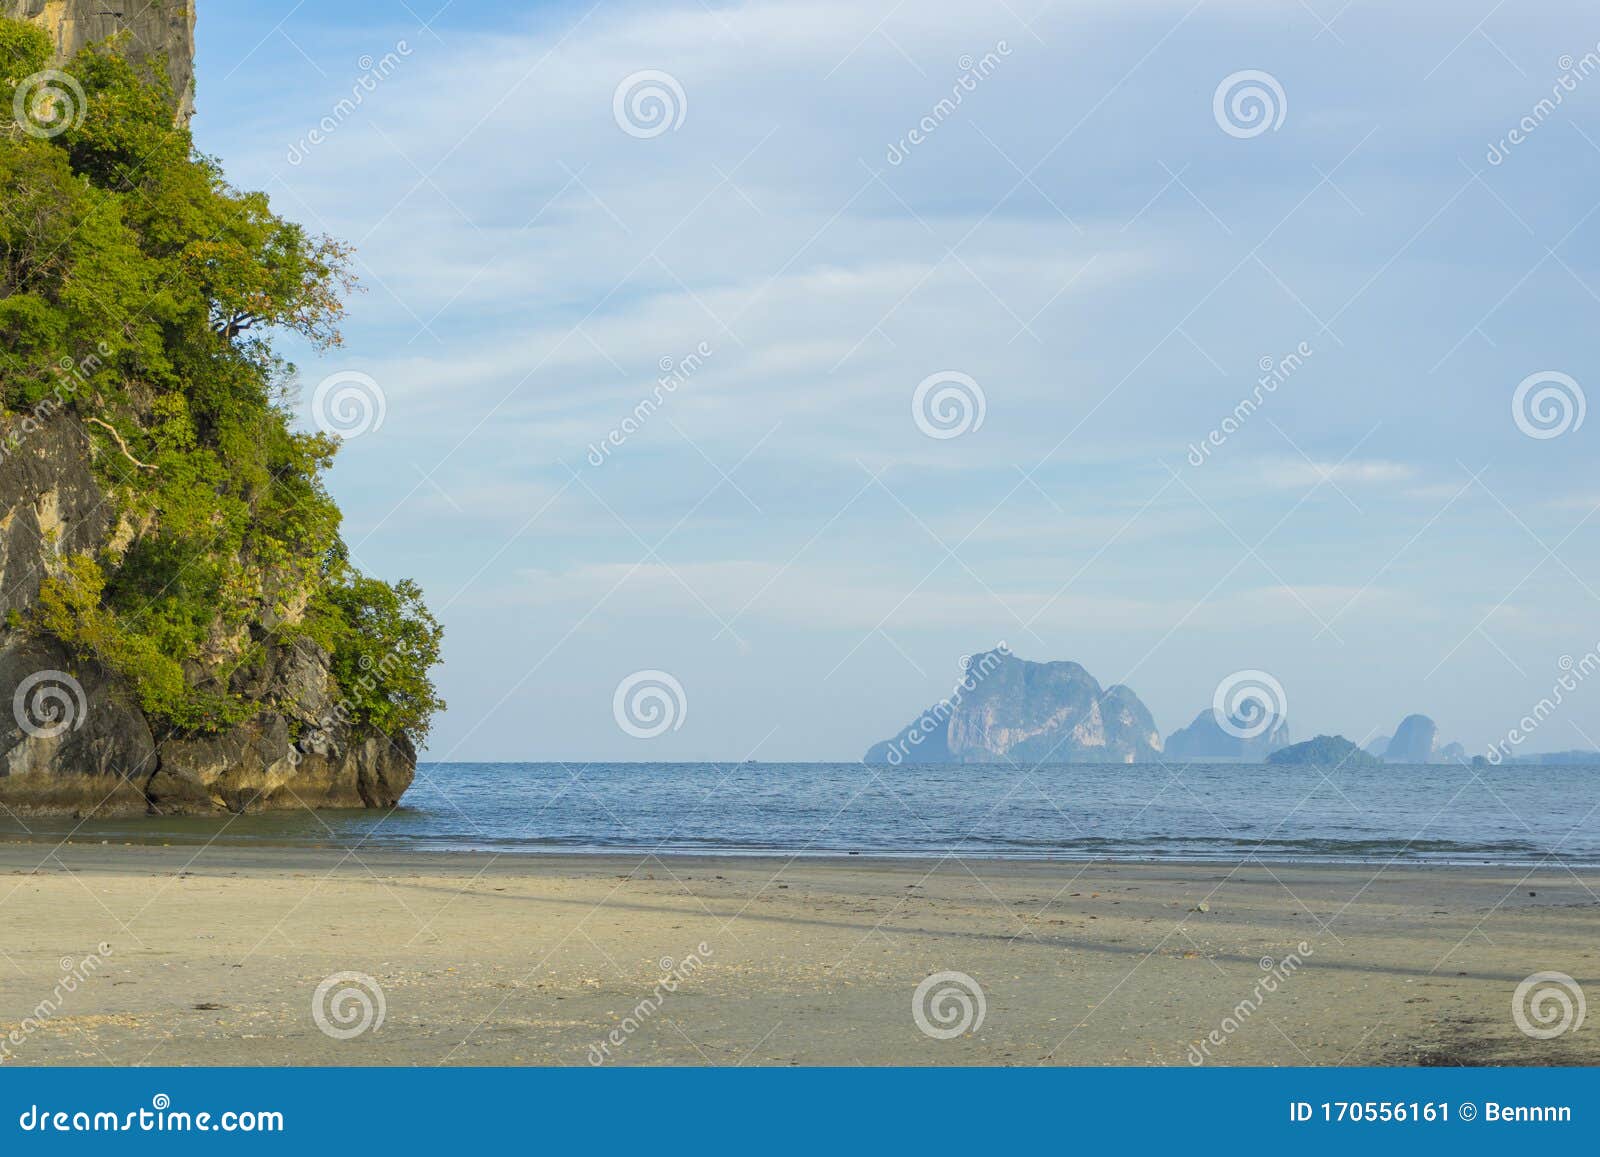 siv positur tømrer Light Blue Sky and Islands in the Background at Hat Chao Mai National Park,  Trang Stock Image - Image of beautiful, green: 170556161